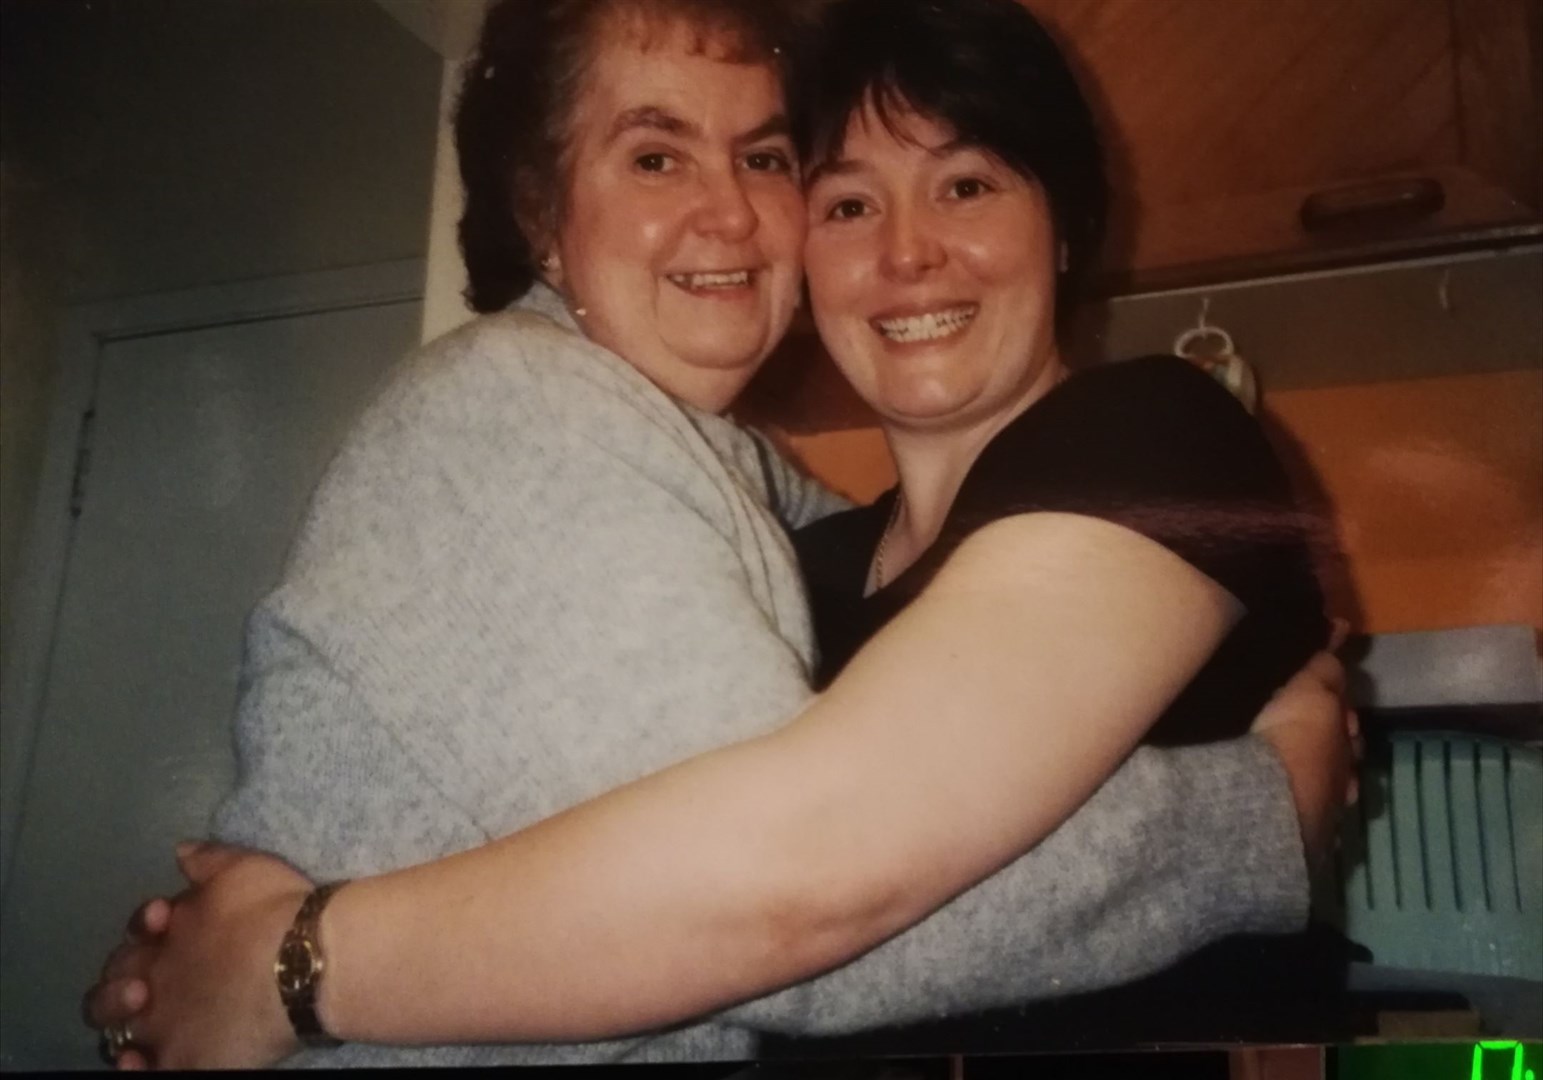 Heather and her late mum, Jay, who inspired her along the way.